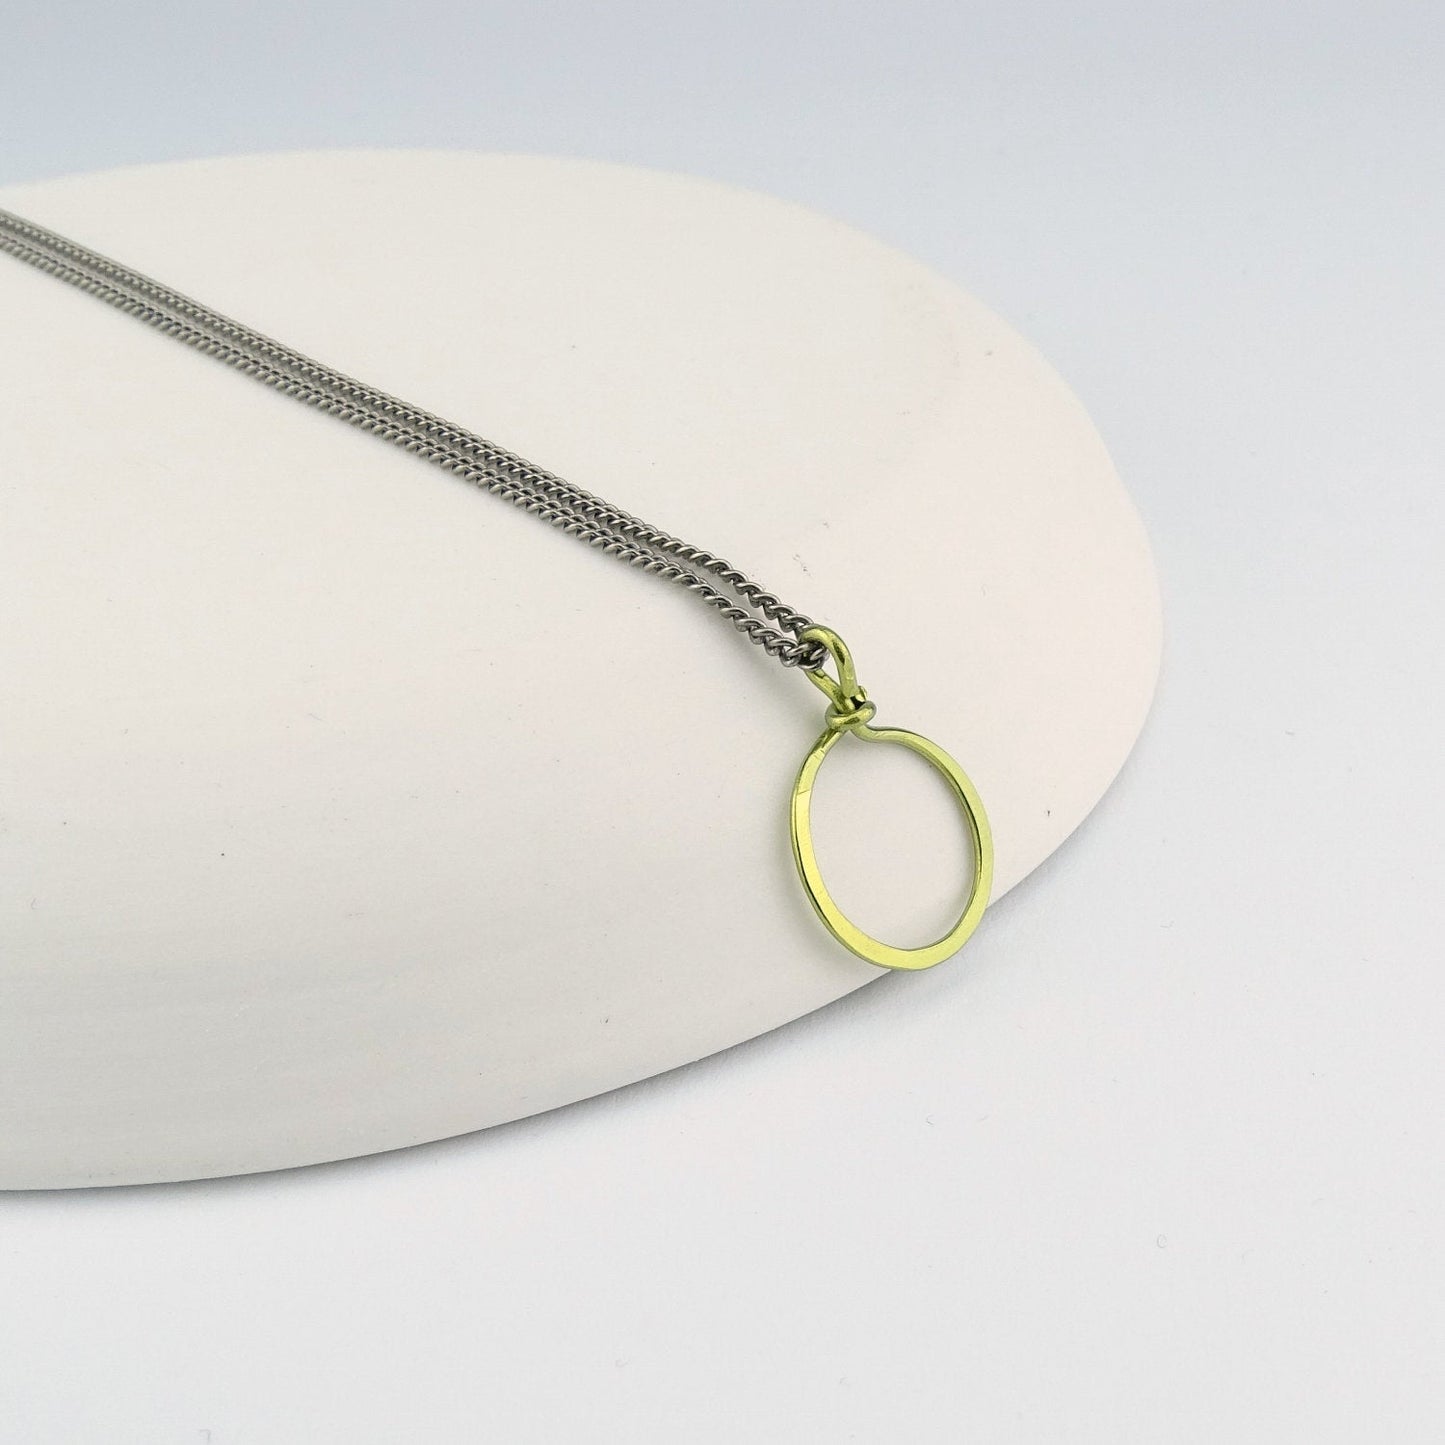 Gold Small Hoop Titanium Necklace, Simple Modern Mixed Metal Hammered Circle Hypoallergenic Niobium and Titanium Necklace for Sensitive Skin